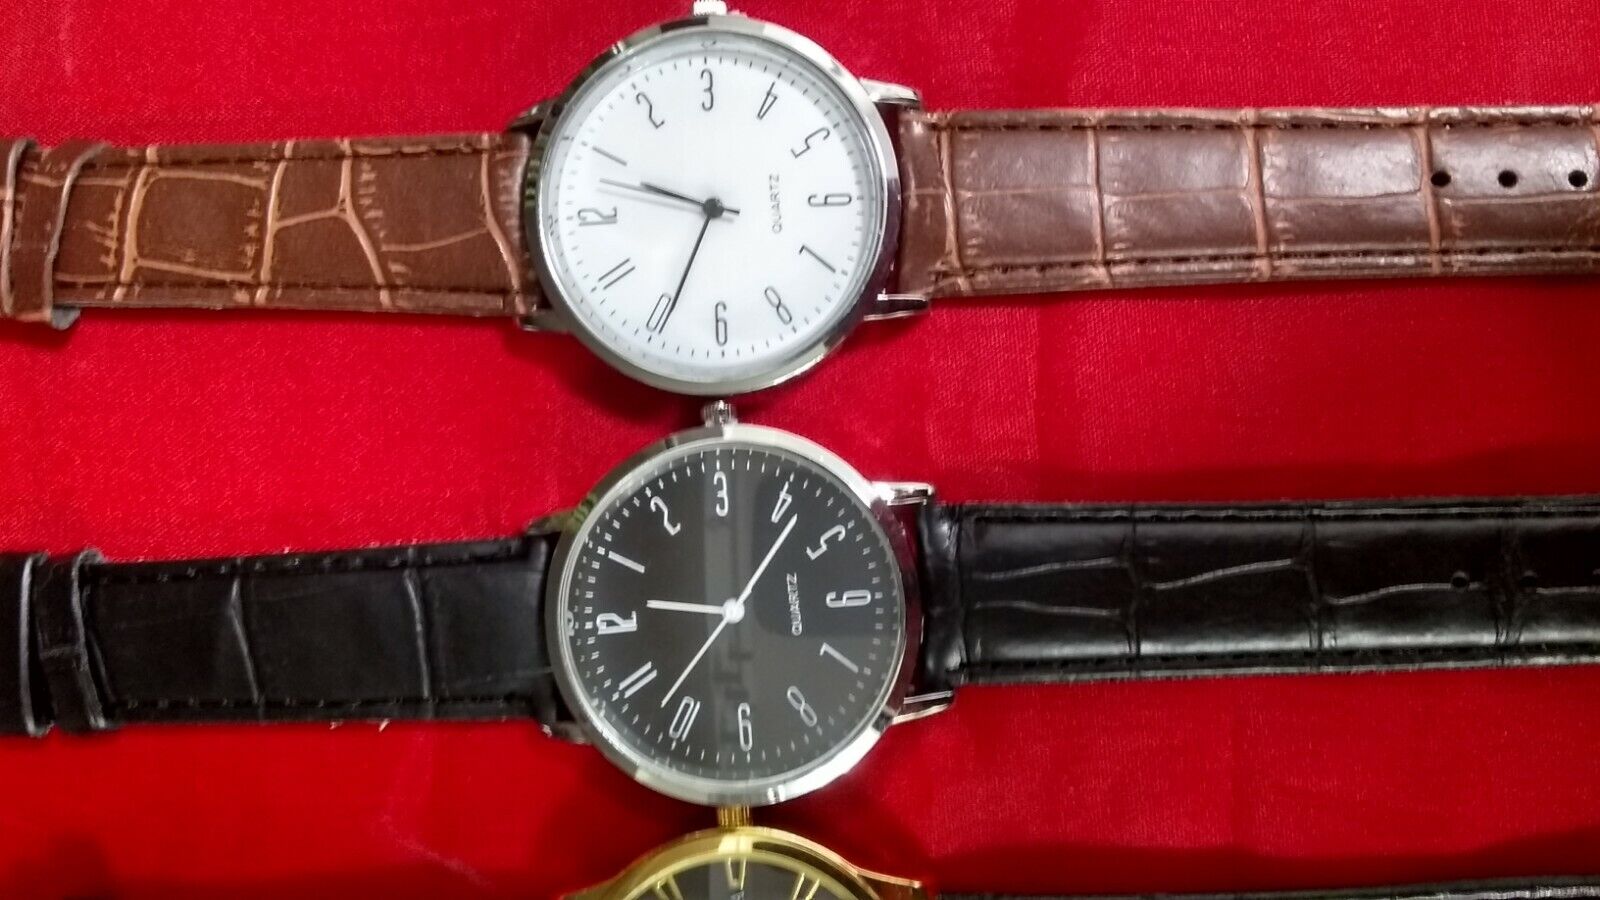 5 Brand NEW Men's Watches 10 FREE SPARE BATTERIES lot Watch  # 43211234 Unbranded - фотография #5